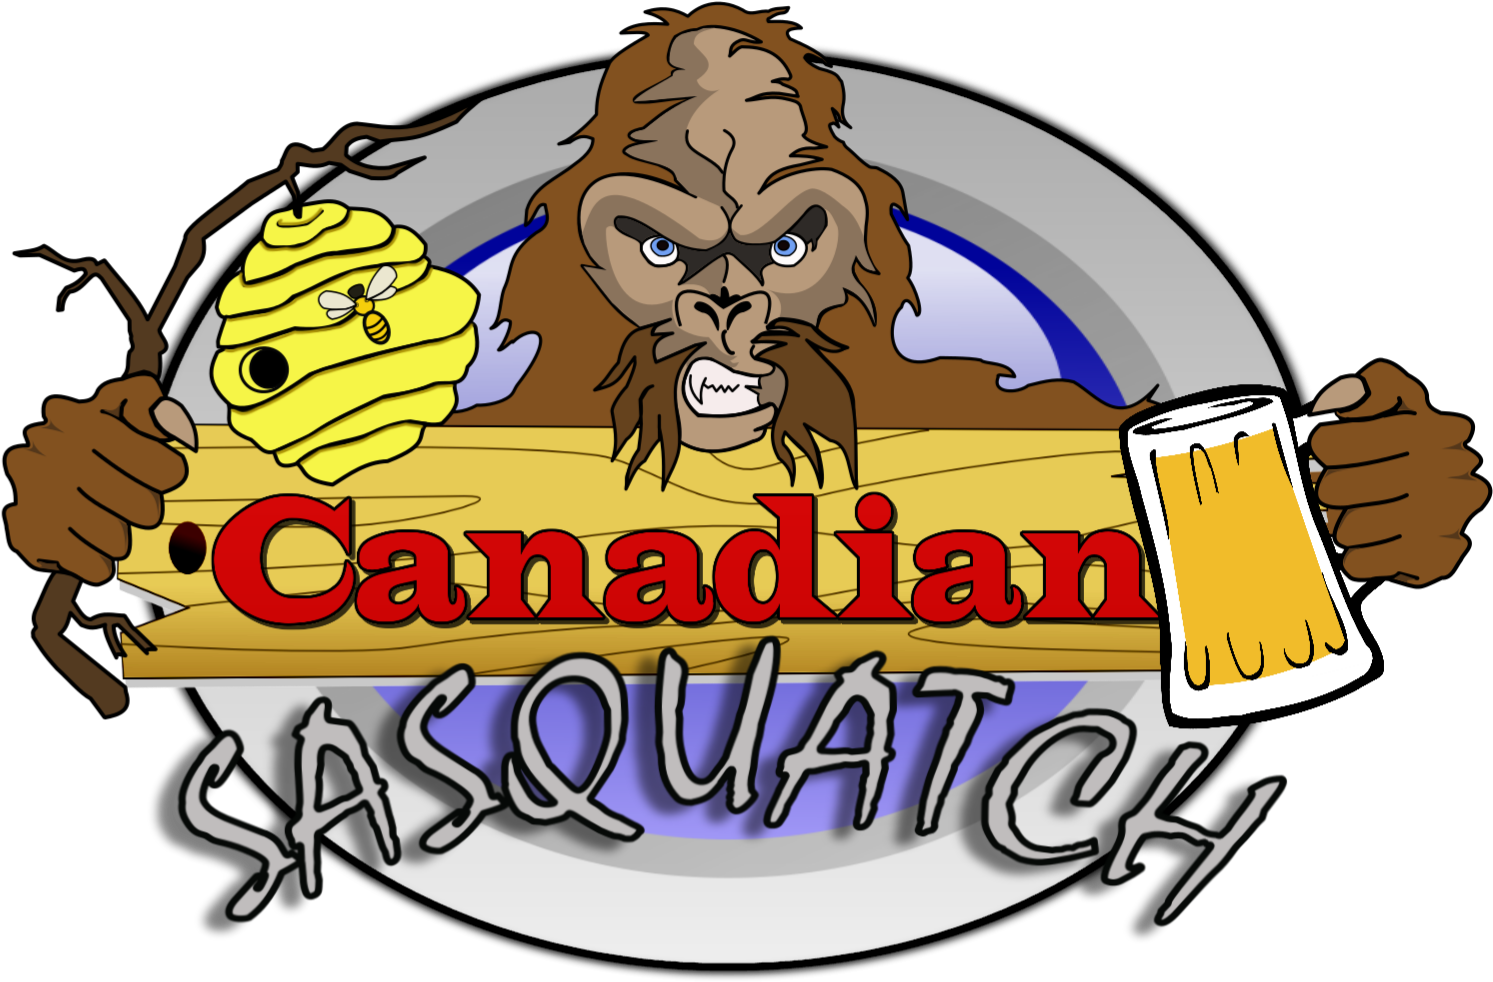 Canadian Sasquatch Brewery - James Strong (1638x1047)